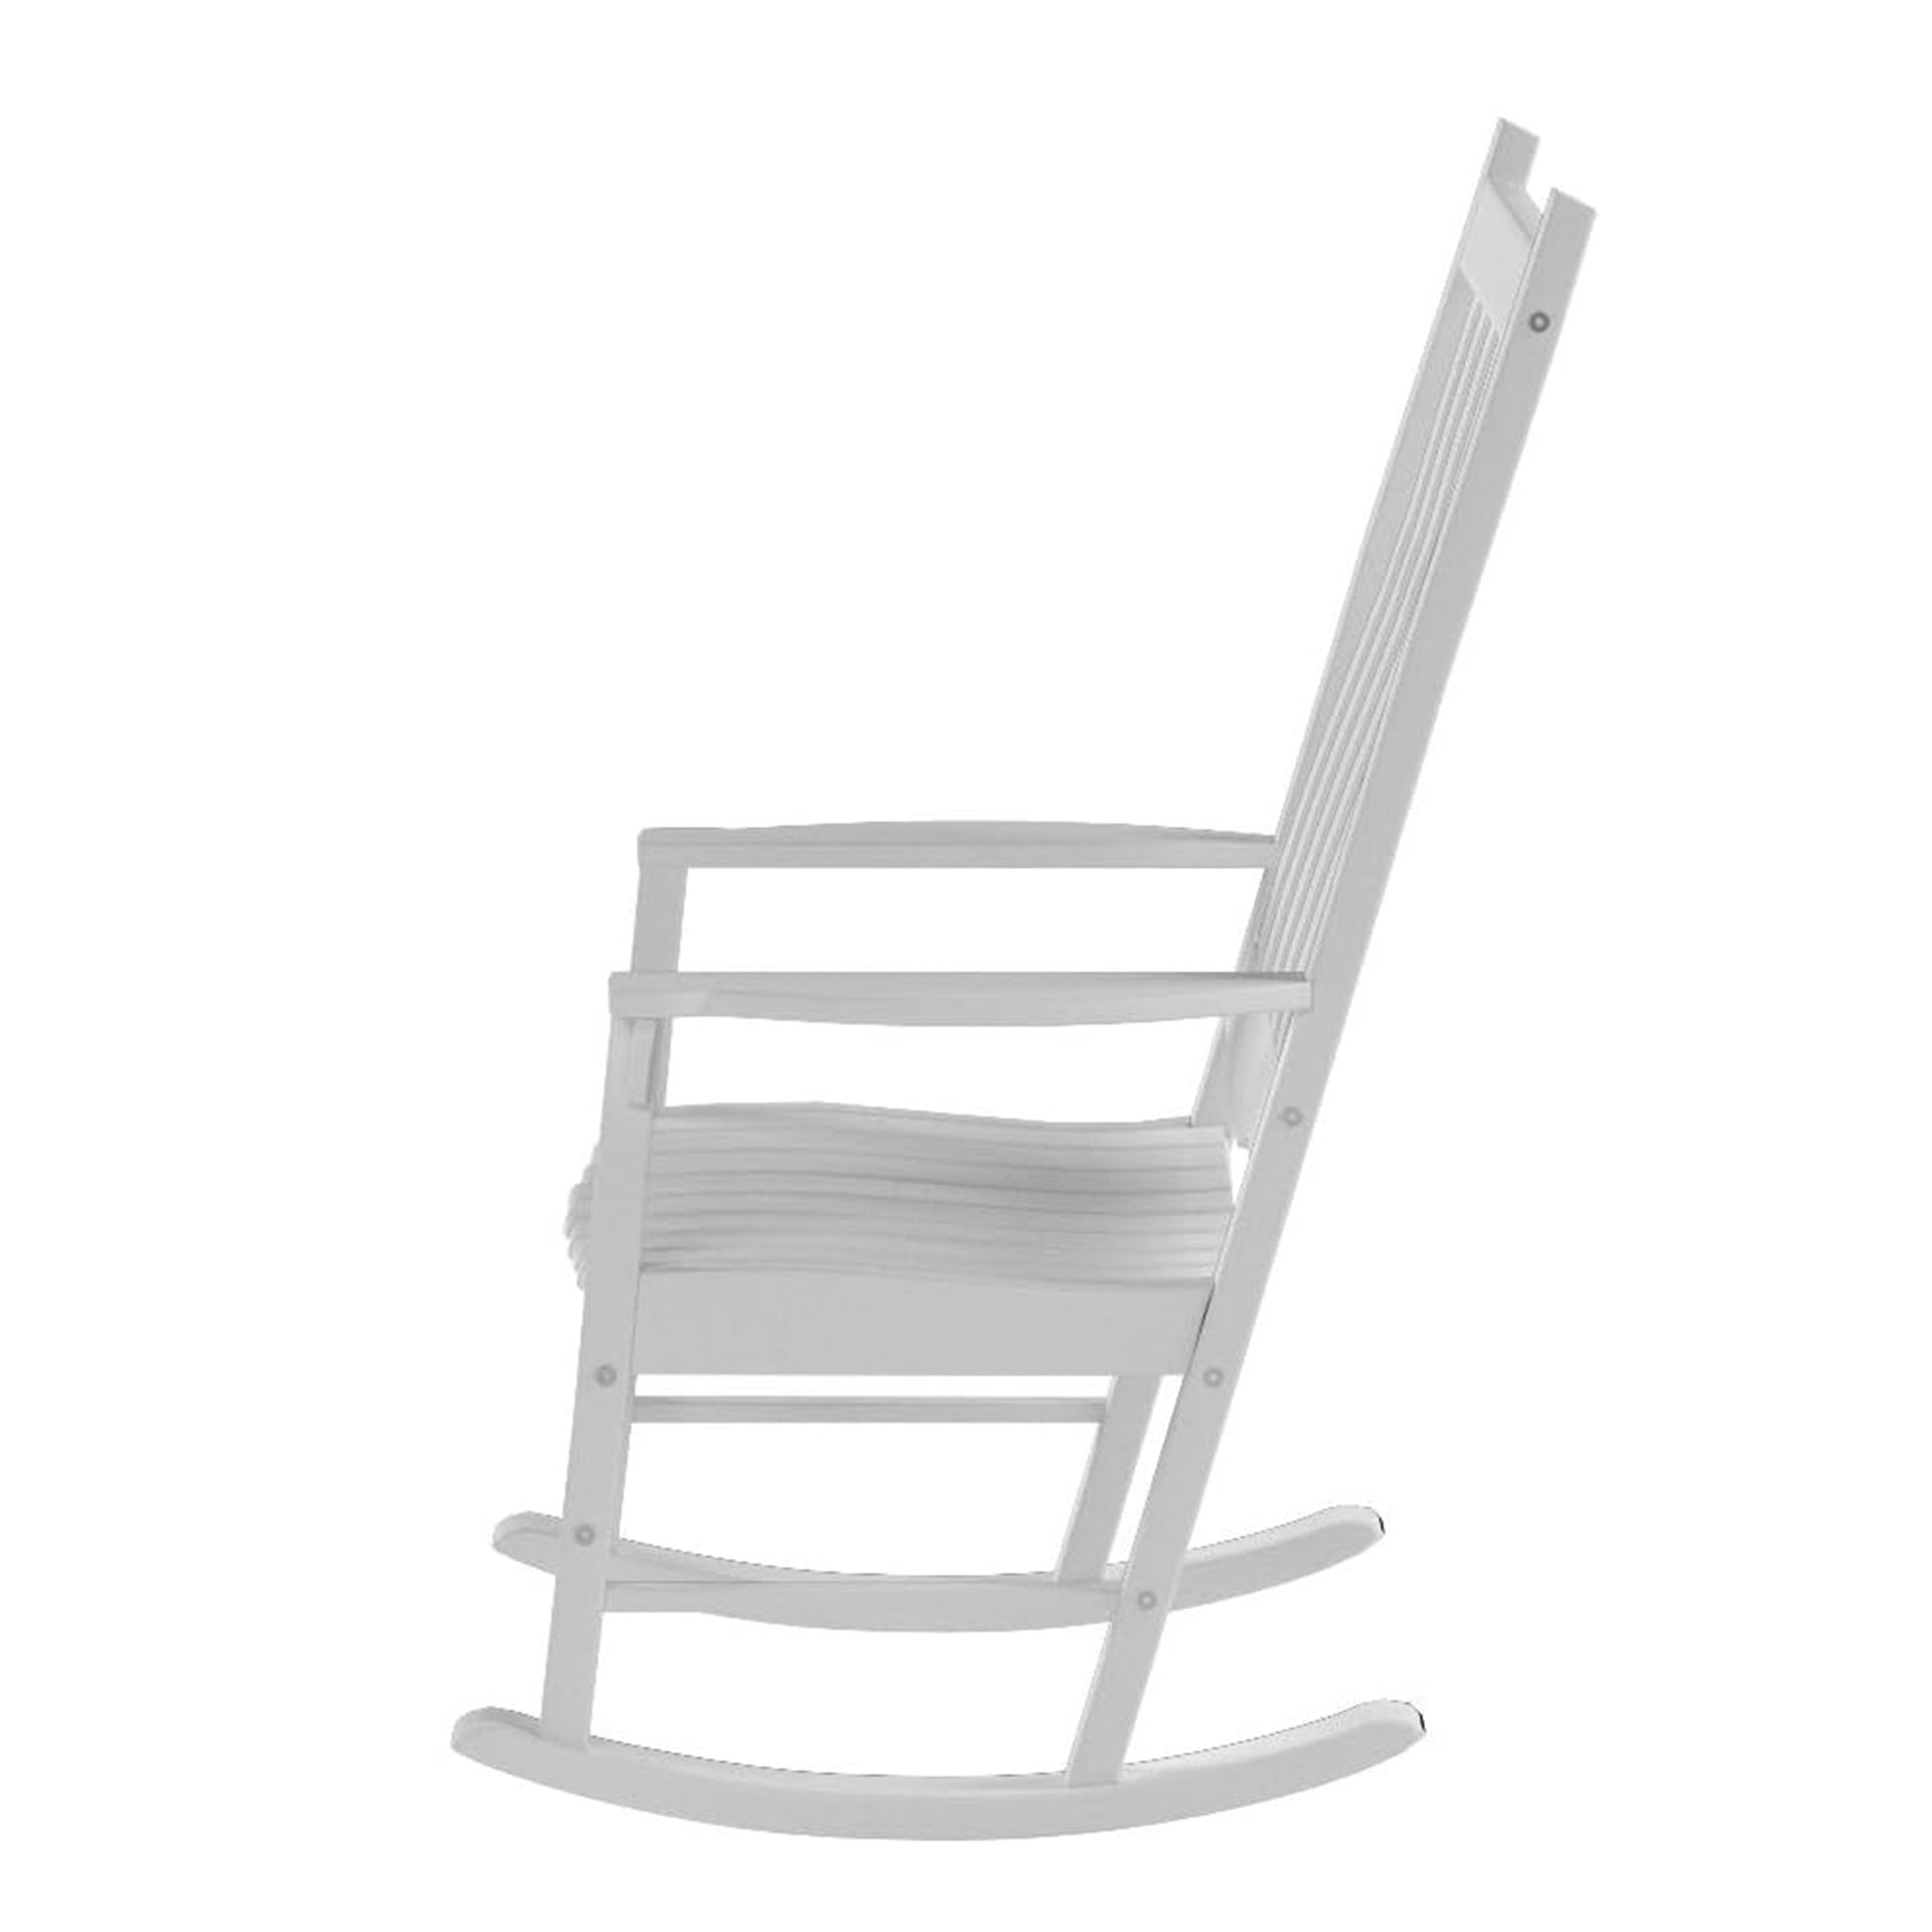 Northbeam Solid Acacia Hardwood Outdoor Patio Slatted Back Rocking Chair, White - image 3 of 11